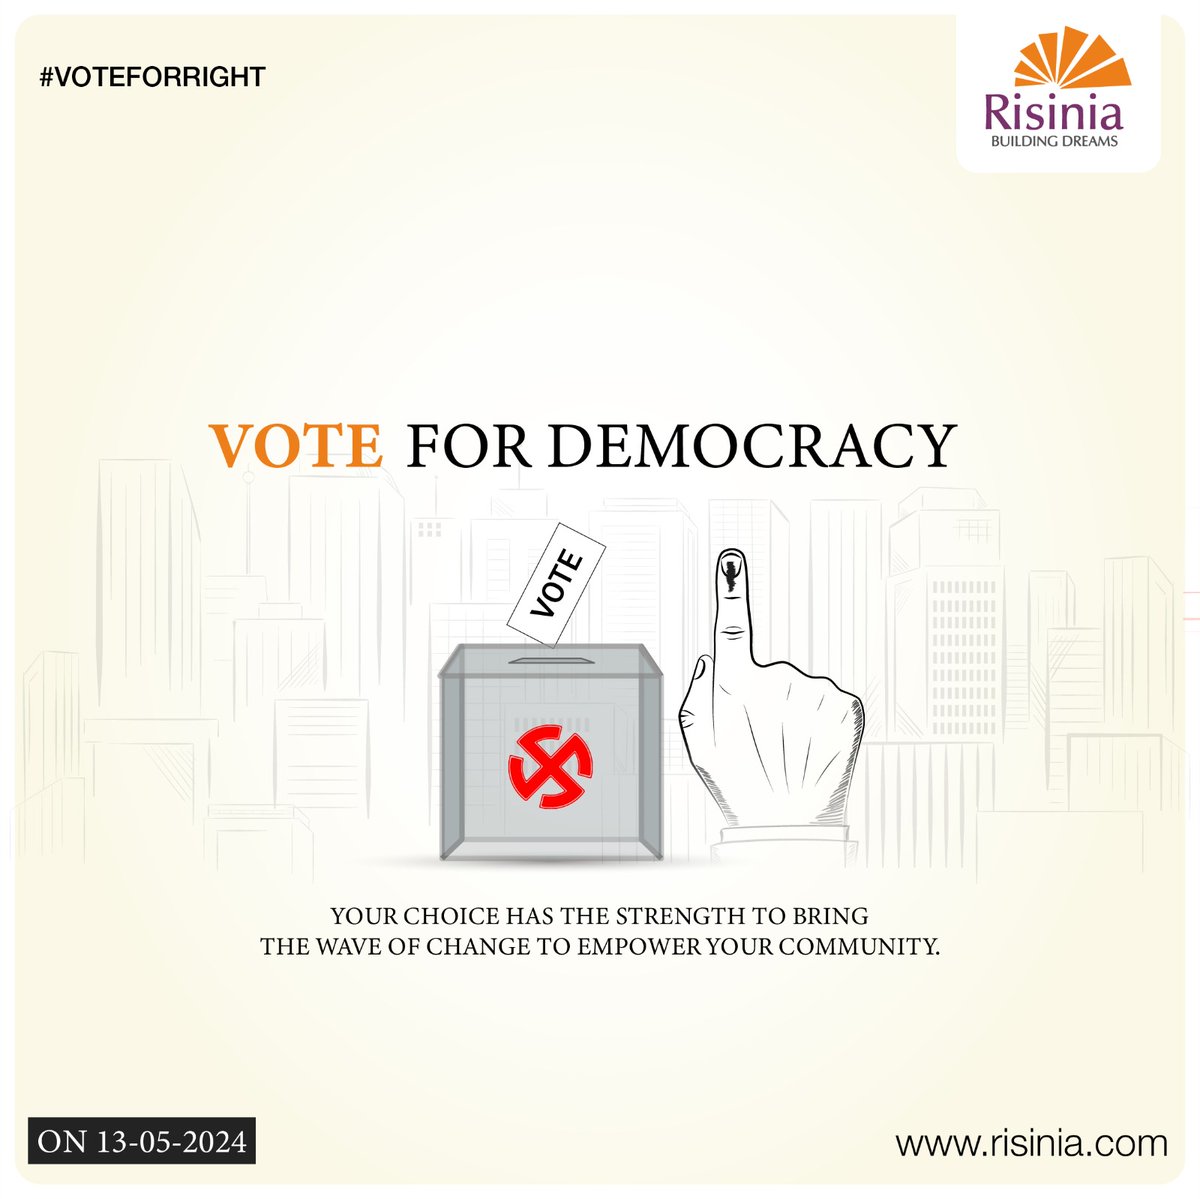 It's time to make your choice and participate effectively as a responsible citizen of our country in its progress. Vote for a better future.
.
.
.
#risiniabuilders #elections #elections2024 #voting #votingday